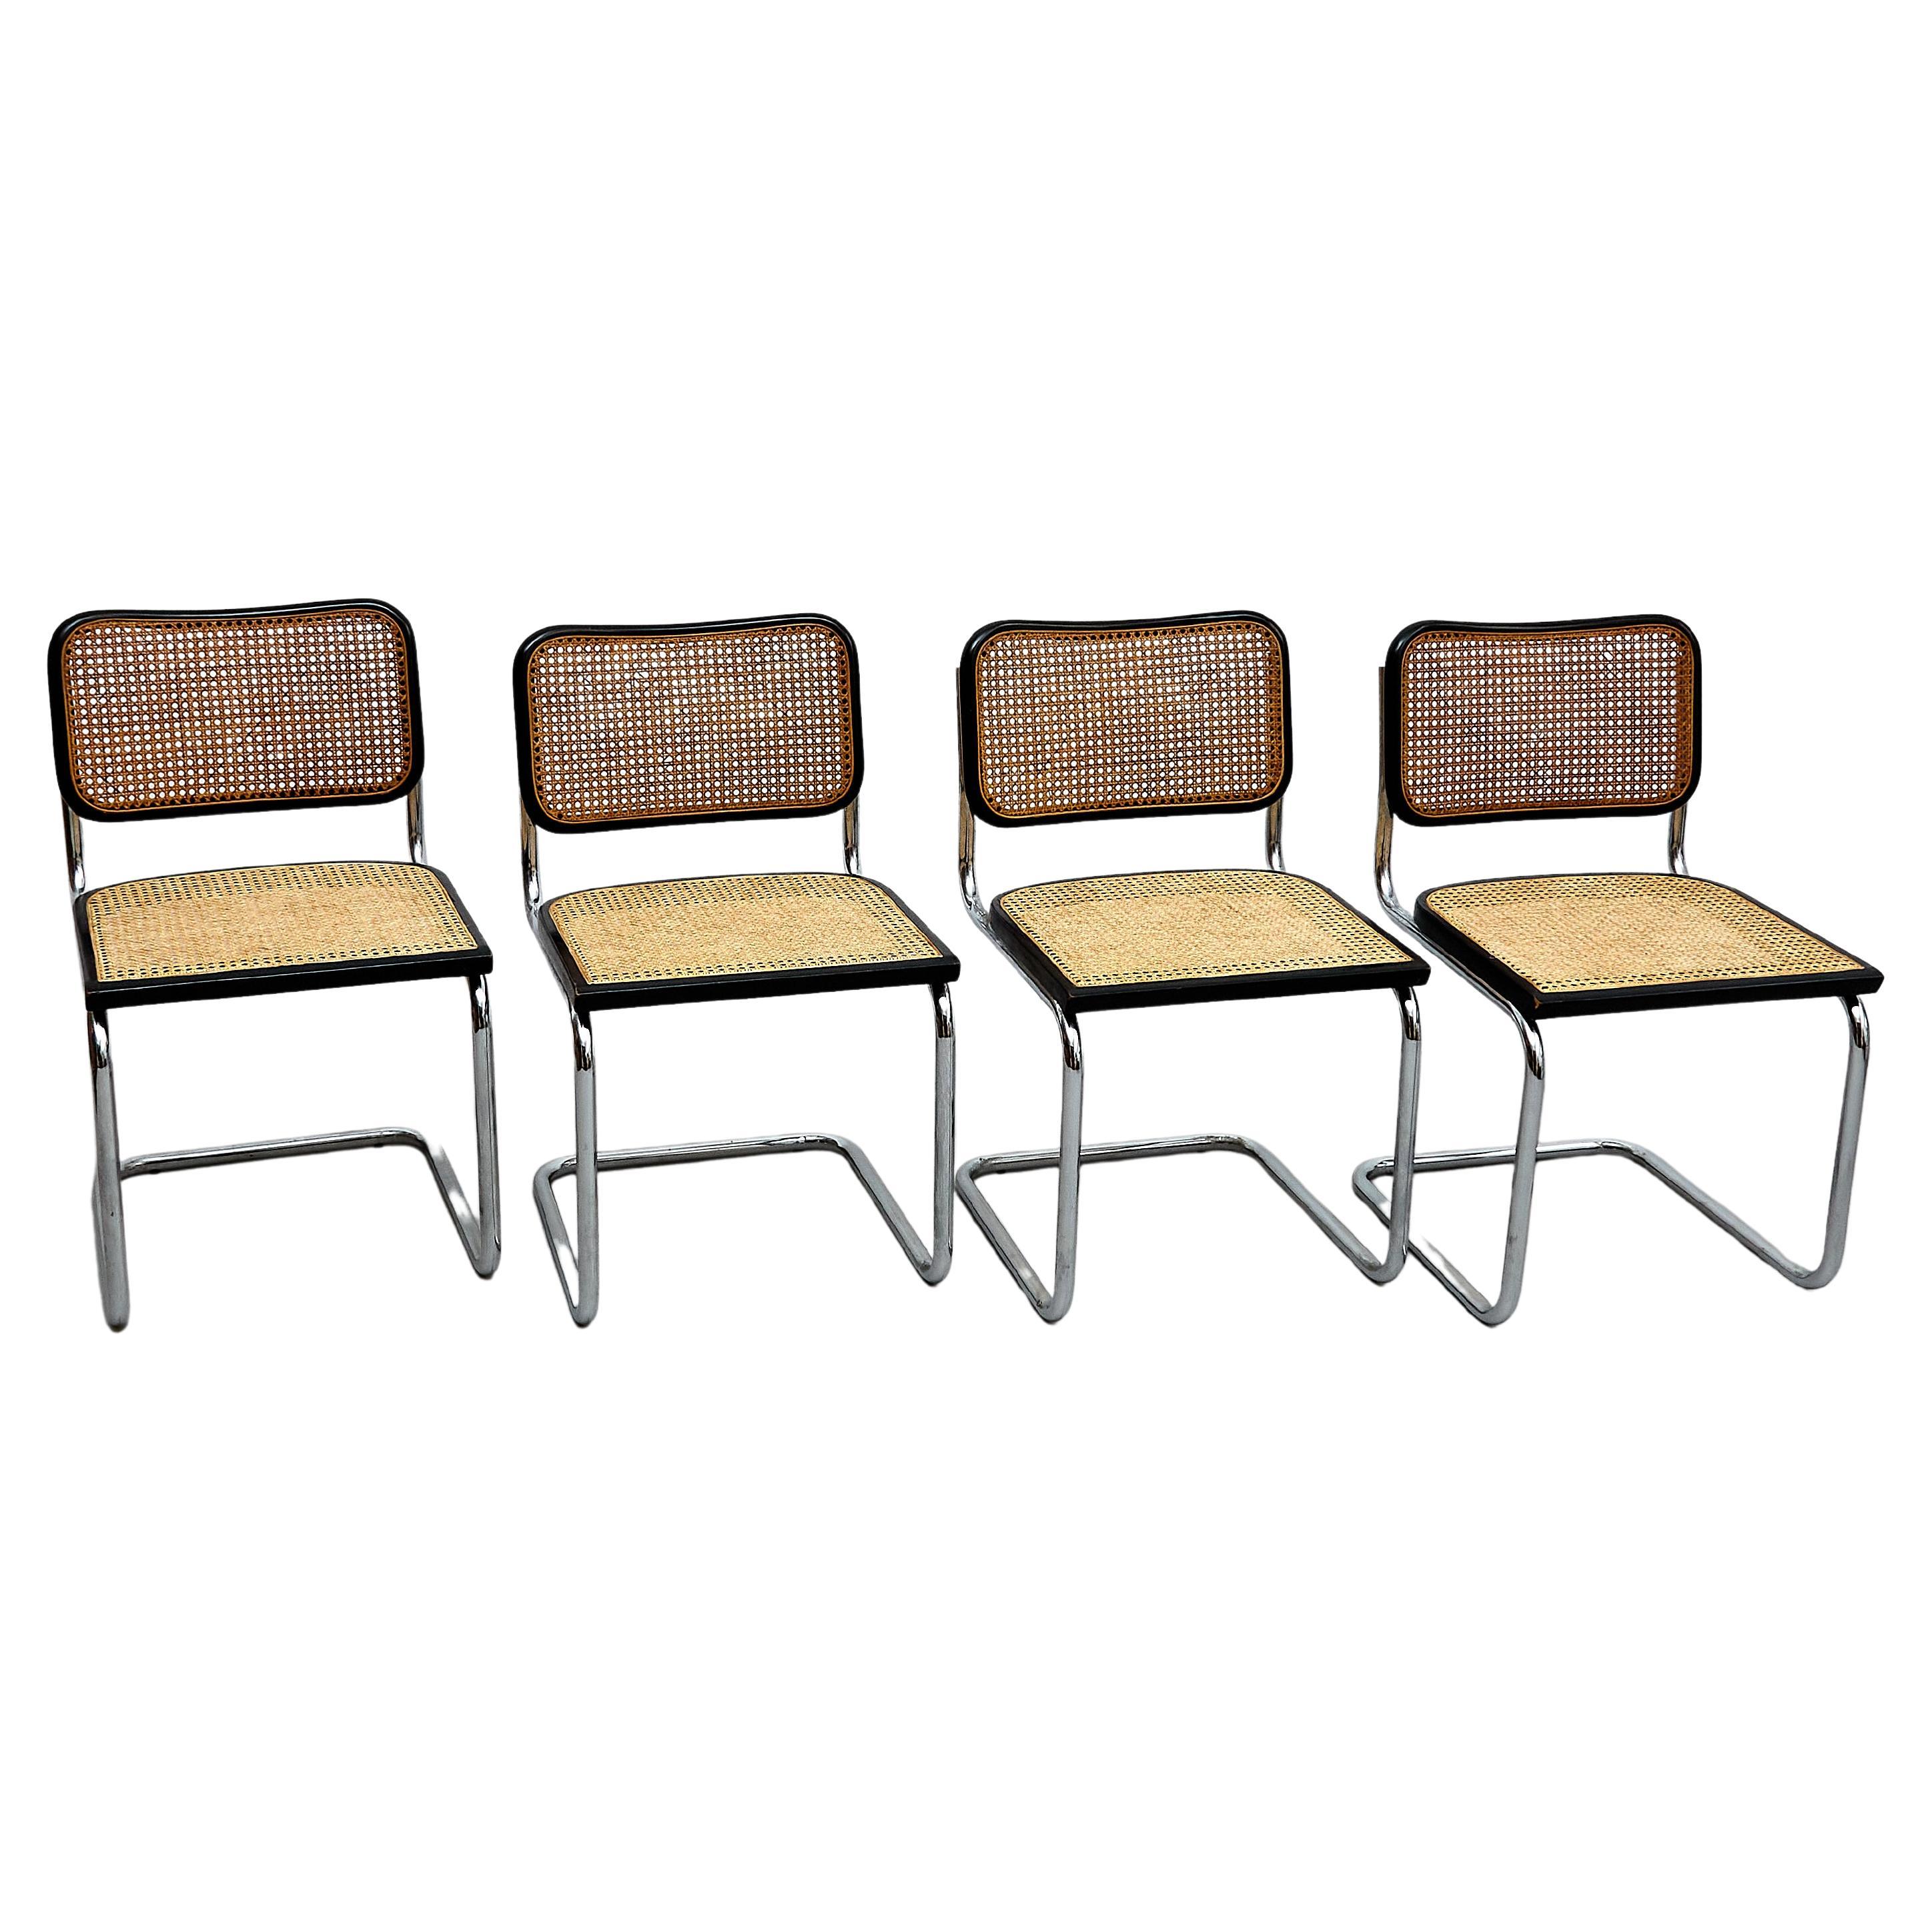 Set of 4 Marcel Breuer Cesca Metal and Wood Mid-Century Modern Chairs, C. 1960 For Sale